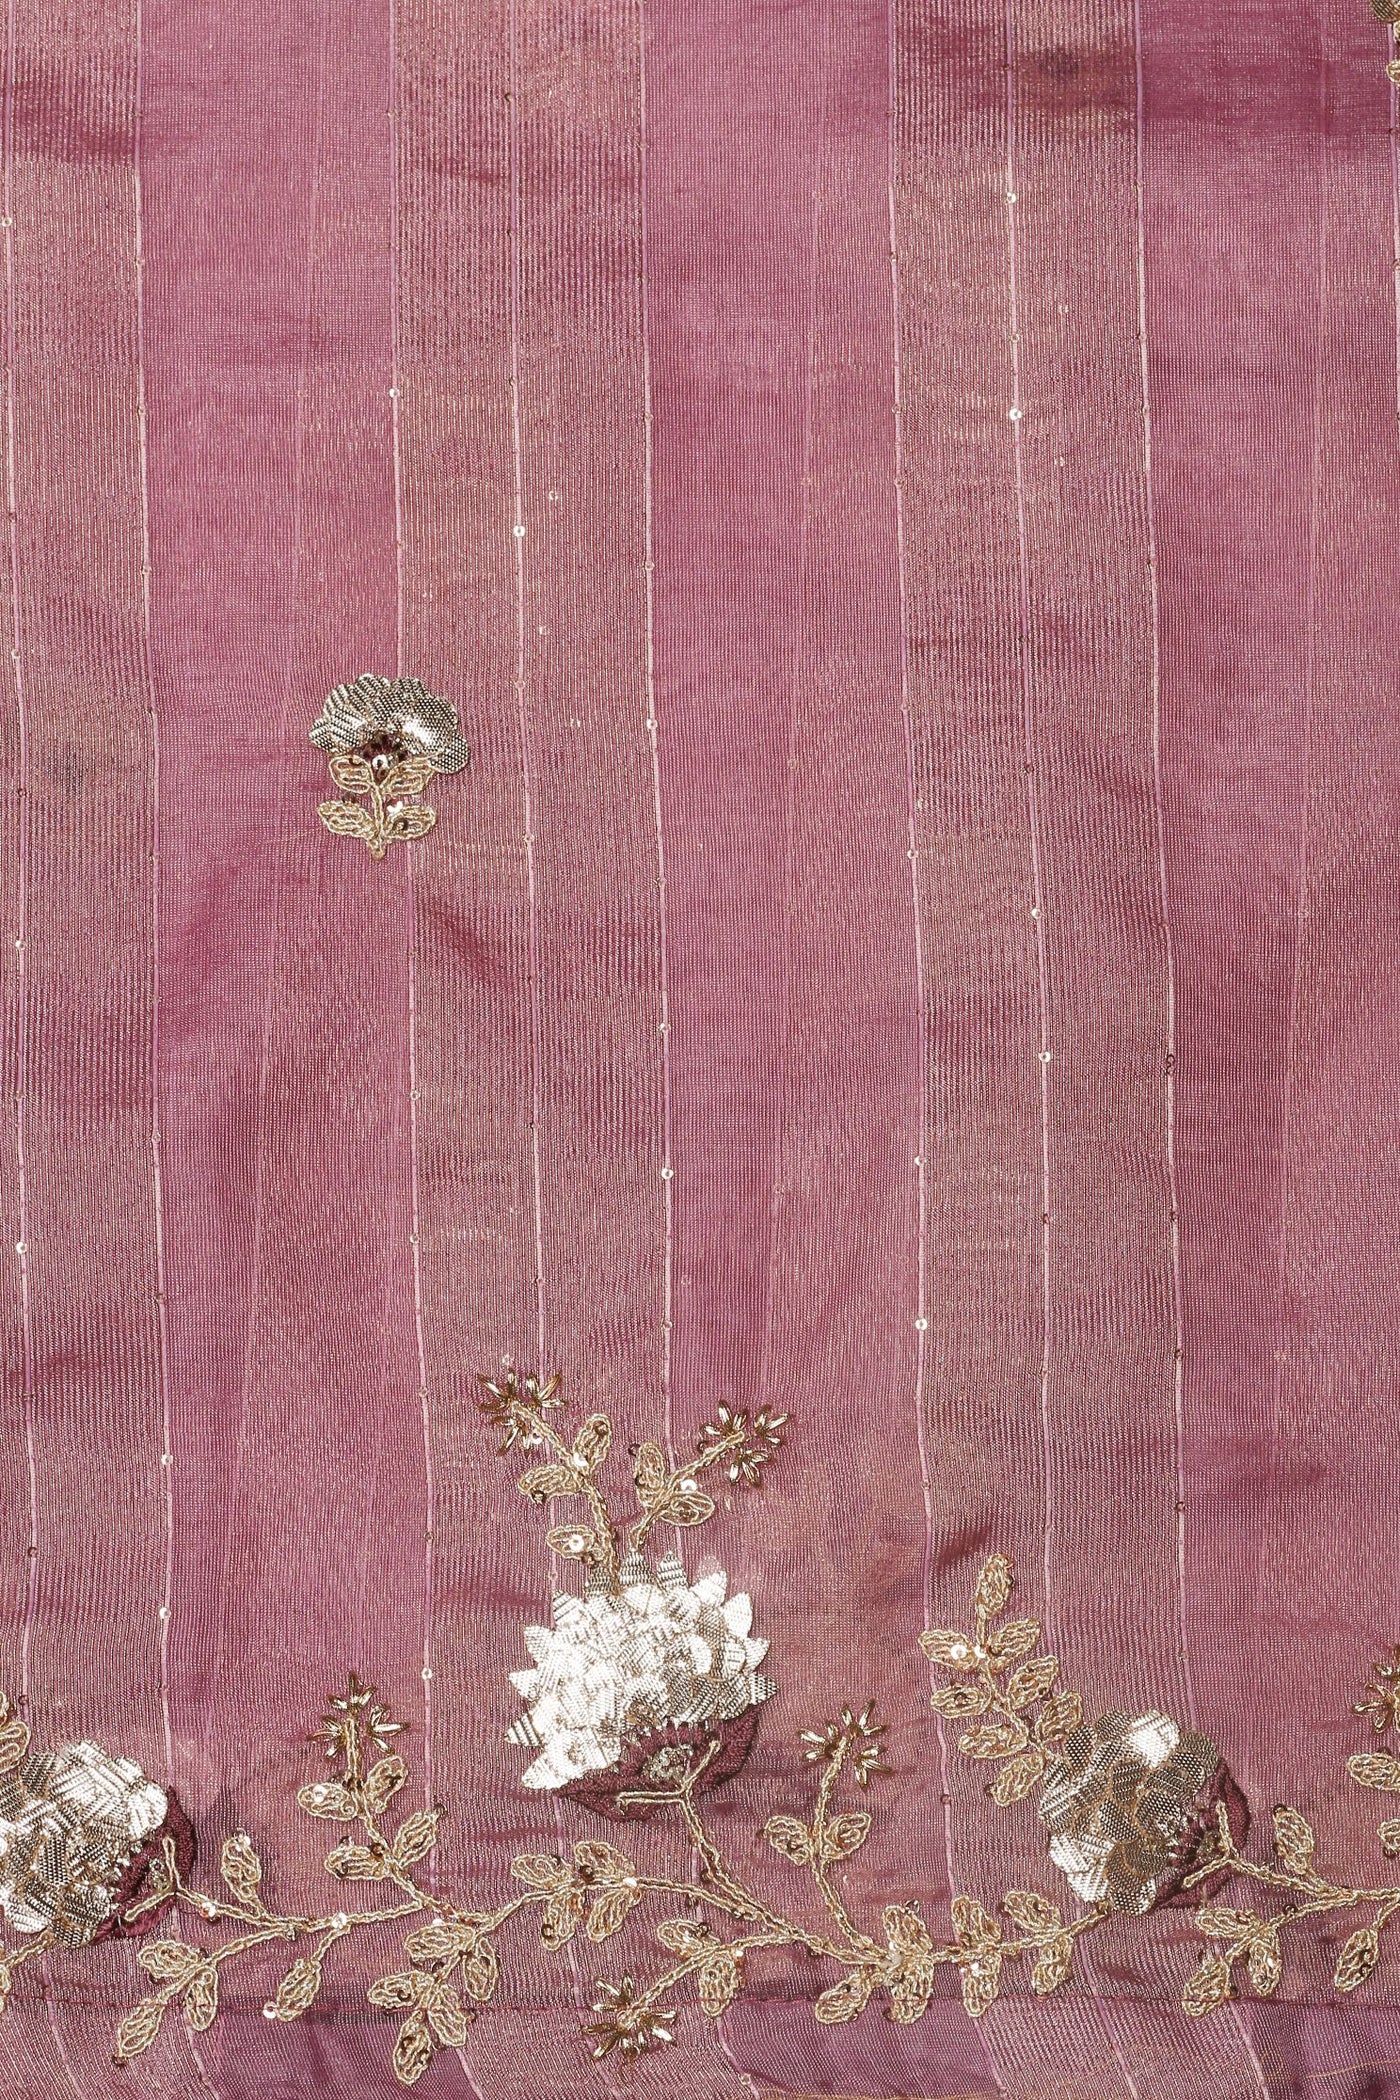 Royal Grace: Purple Color Saree with Thread Work, Gota, and Sequins